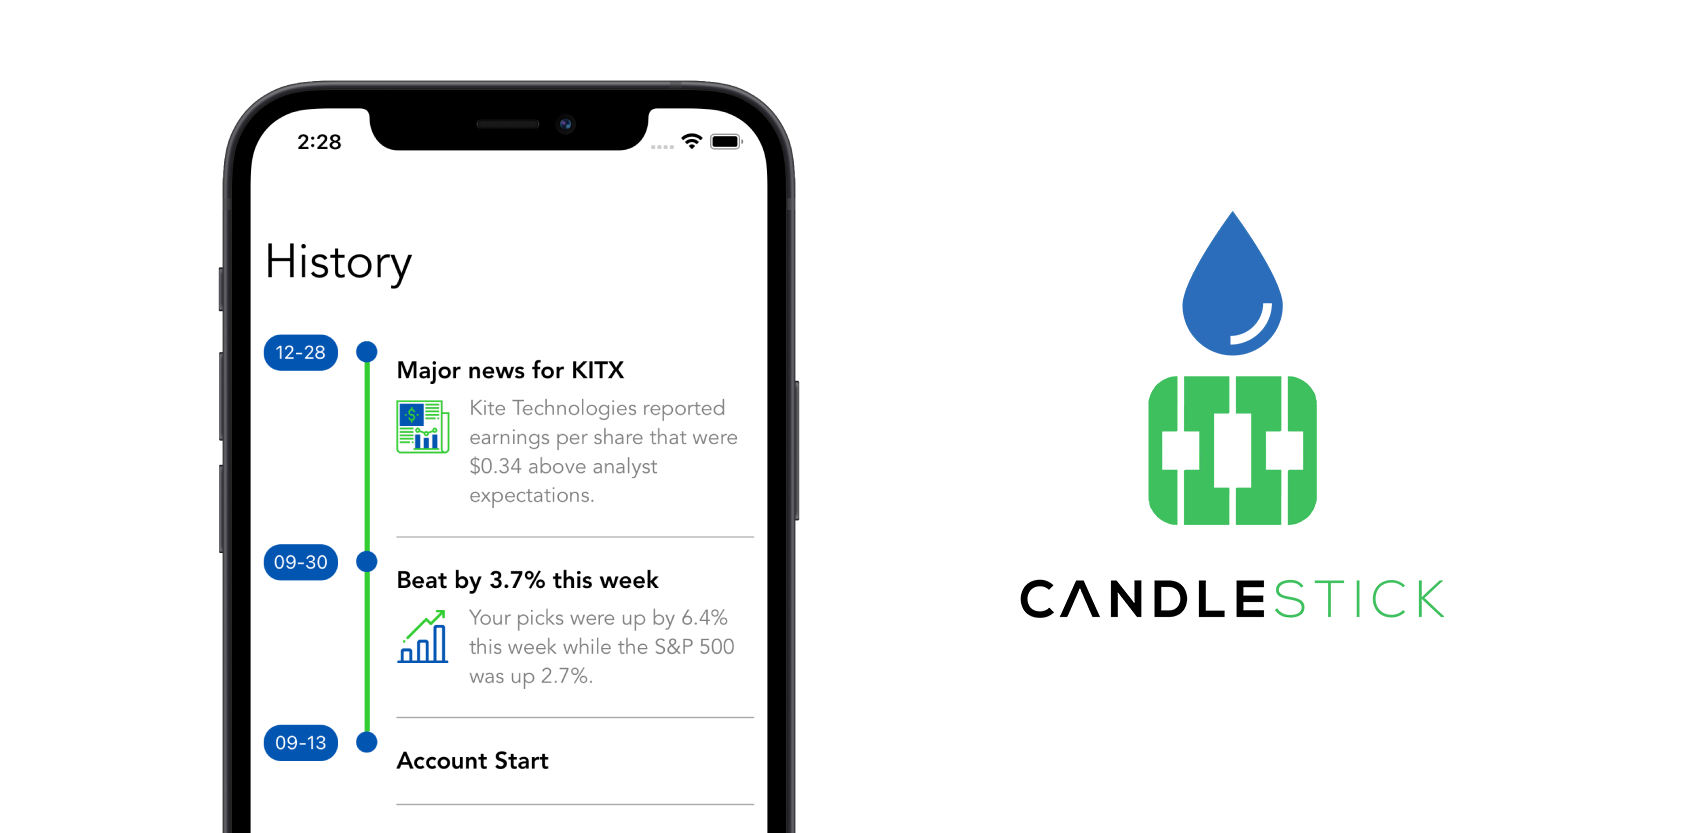 Candlestick - An app for investors to pick stocks